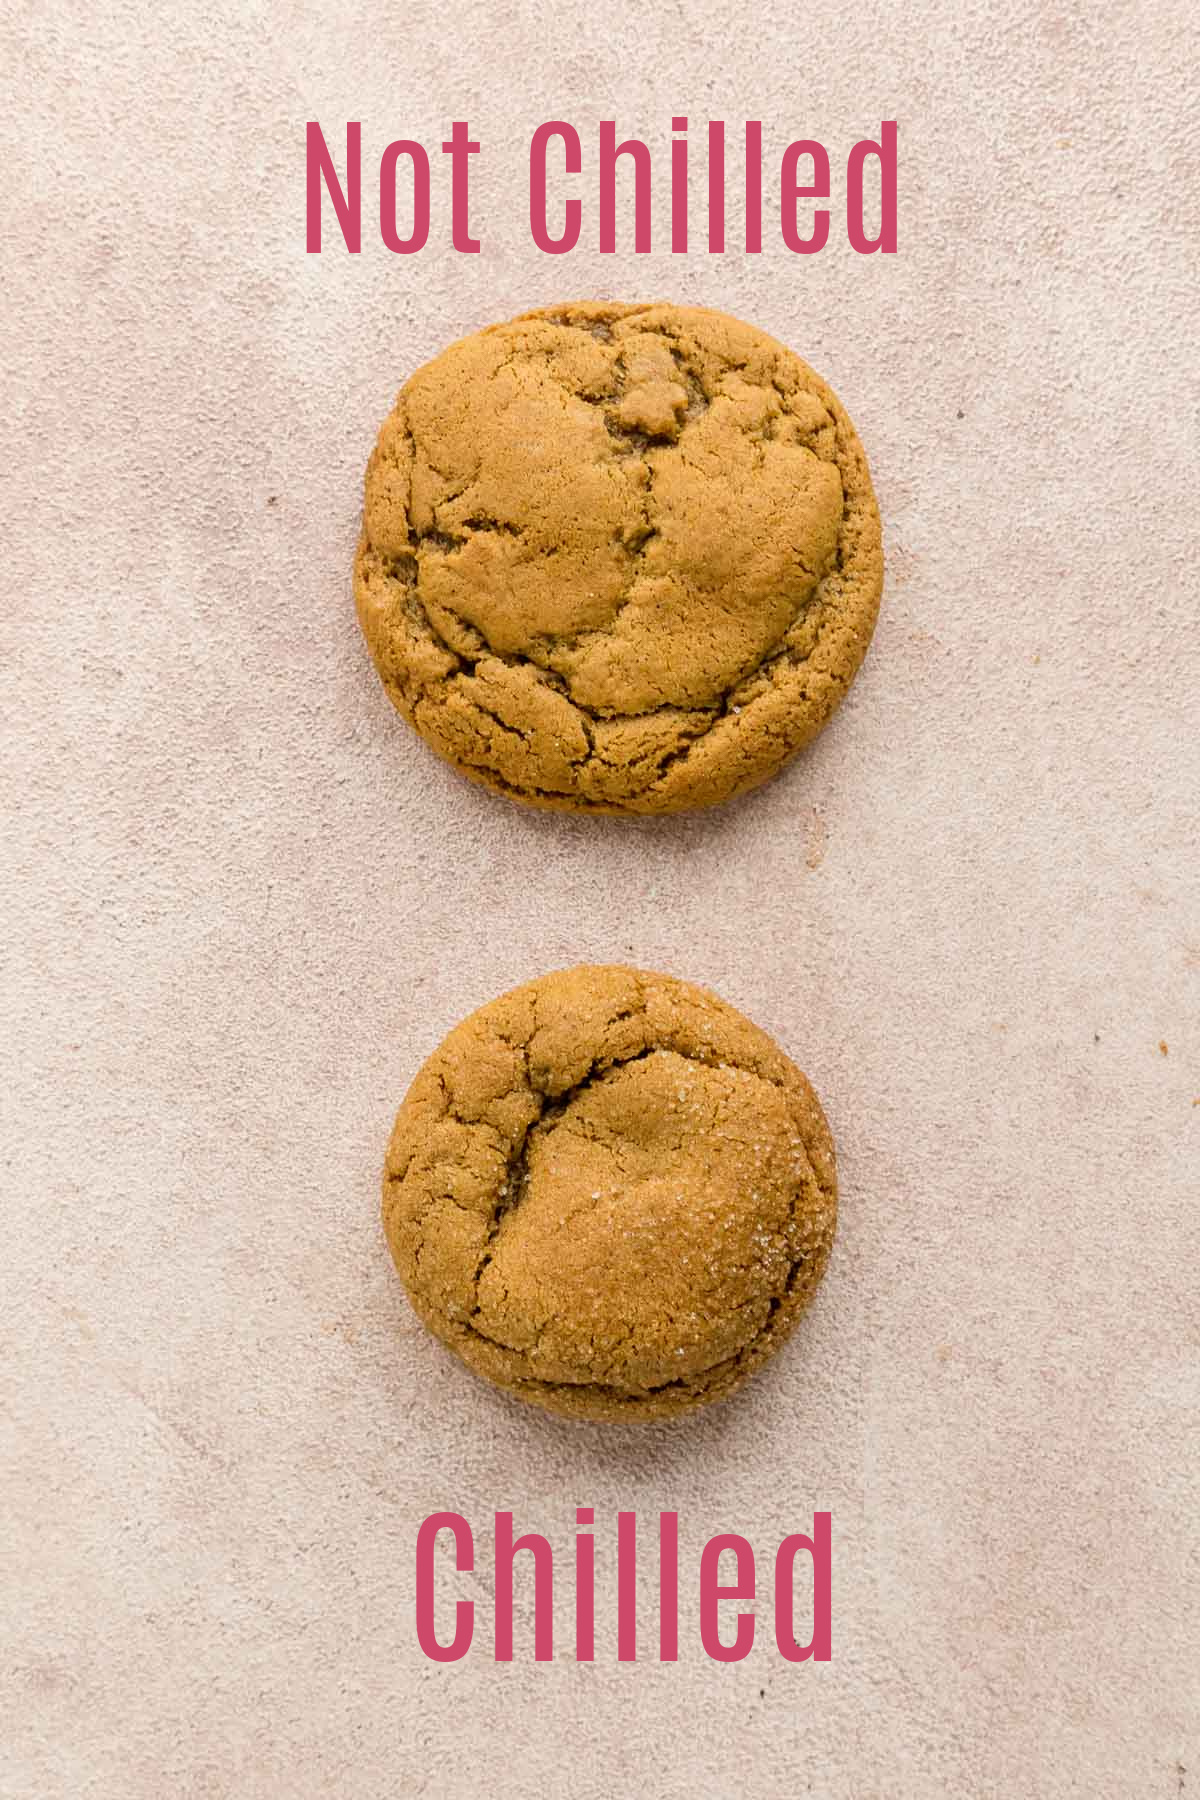 two cookies side by side, one was chilled and one was not chilled